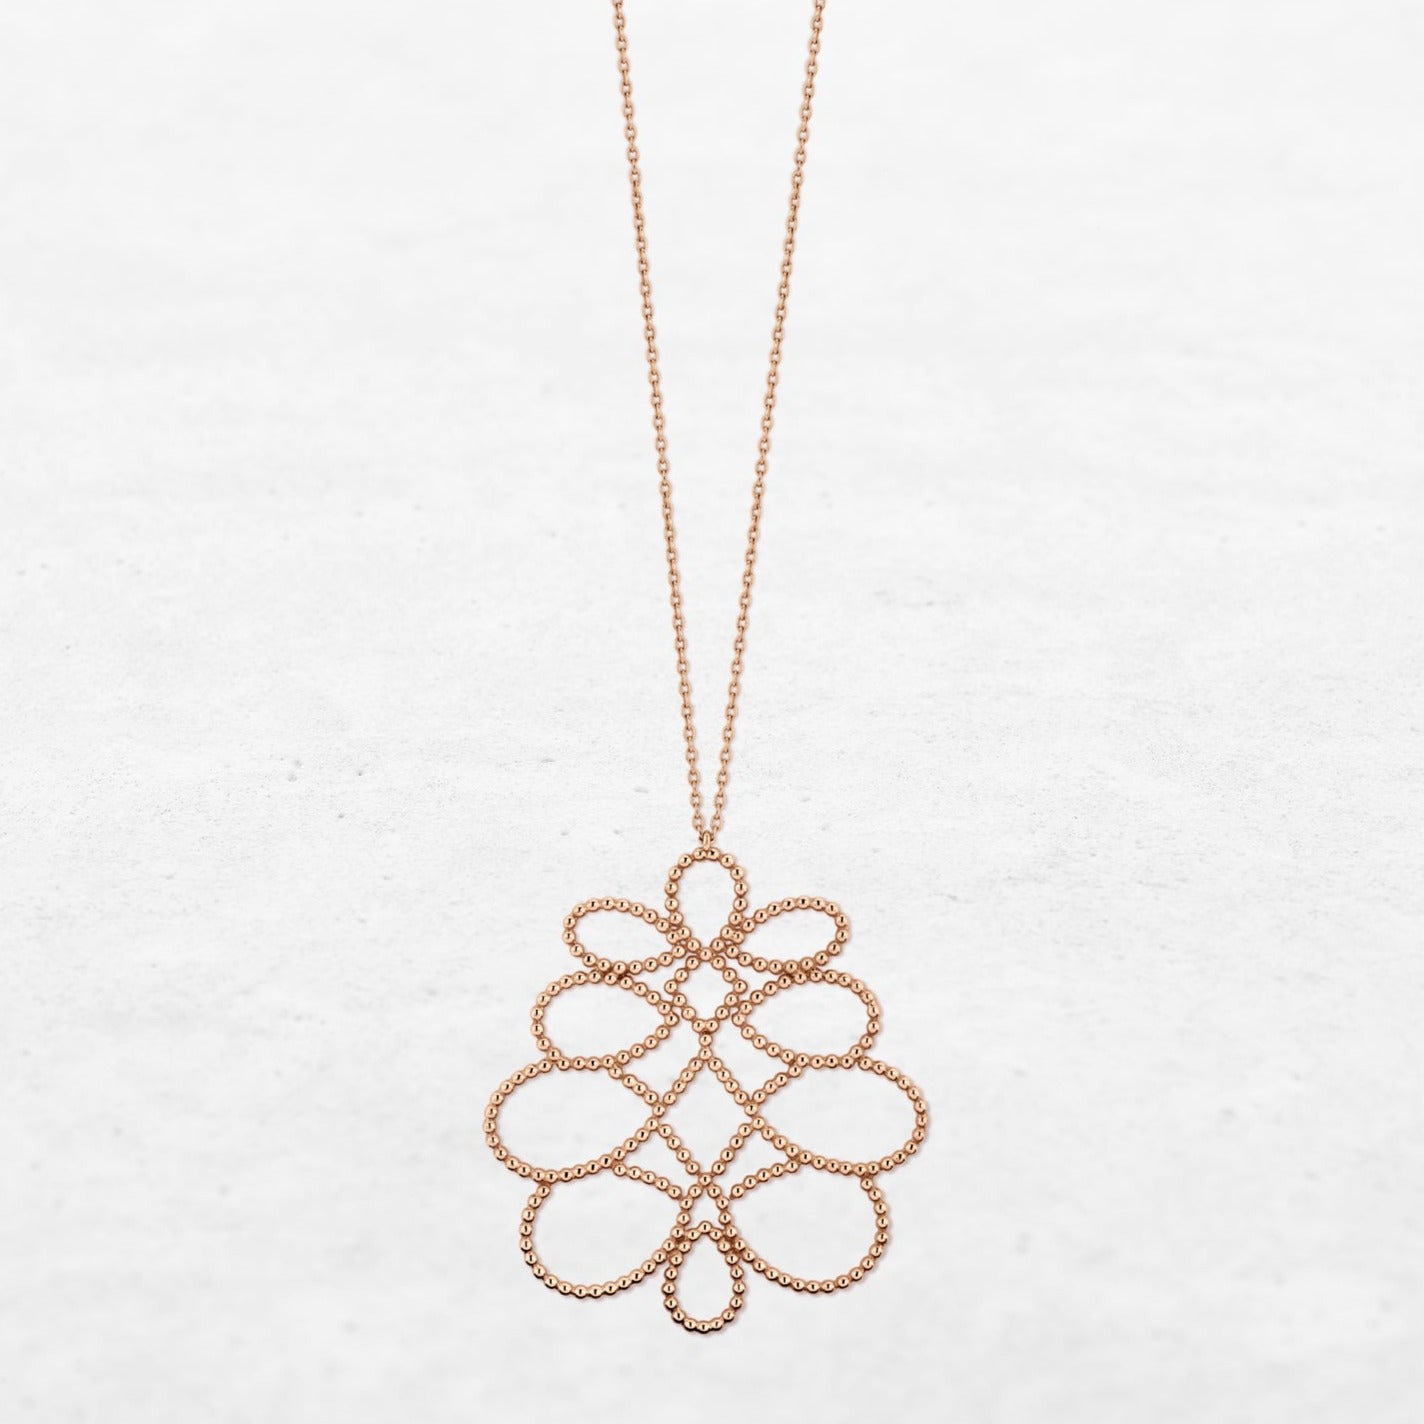 Necklace with different oval shapes in different sizes in rose gold made by O! Jewelry